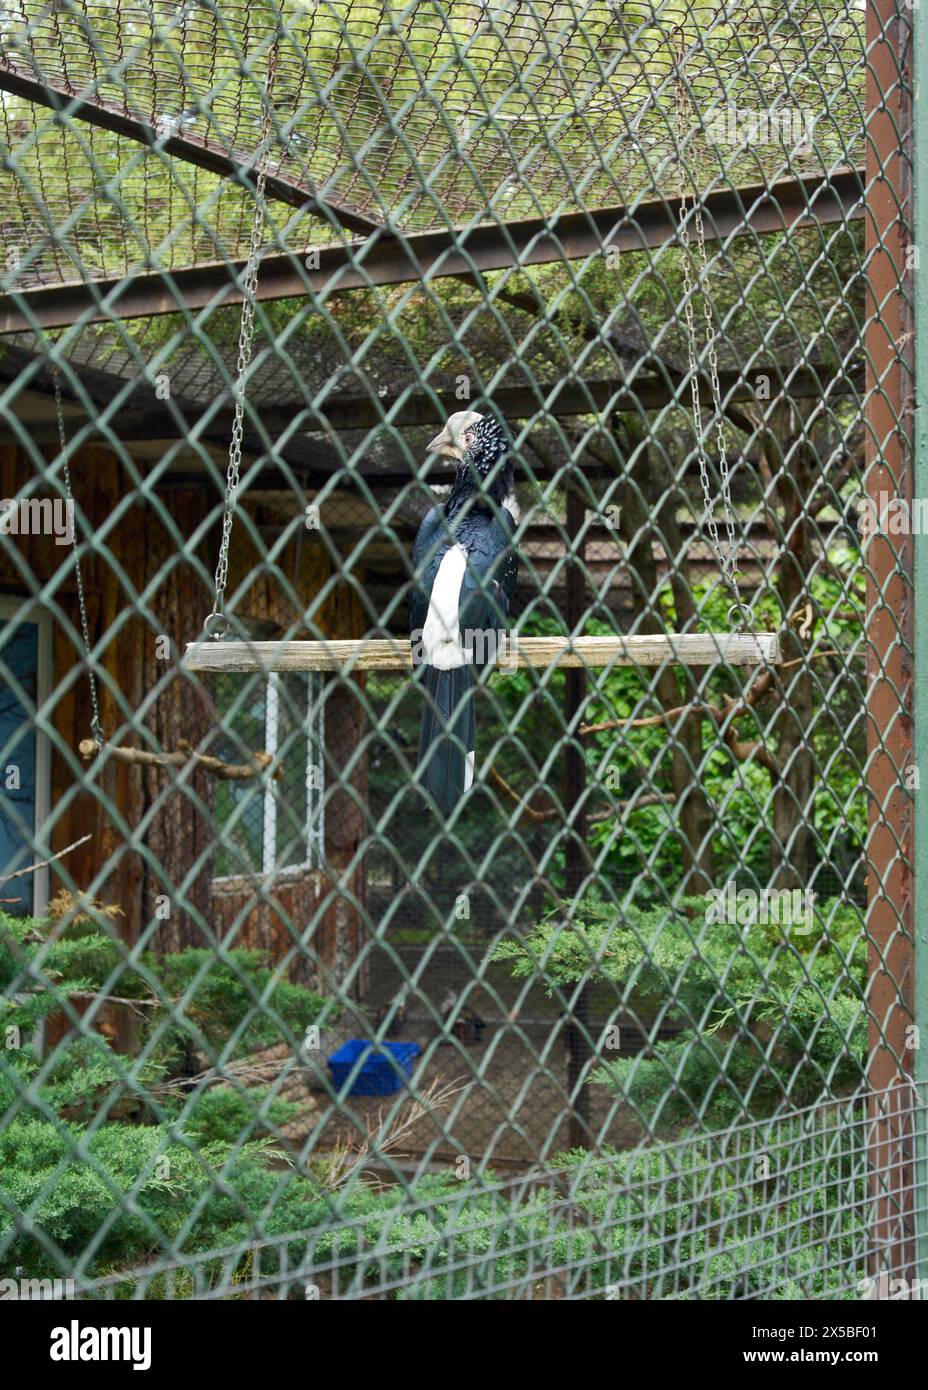 Silvery-cheeked hornbill Bycanistes brevis in its cage in captivity in Sofia Zoo, Sofia Bulgaria, Eastern Europe, Balkans, EU Stock Photo